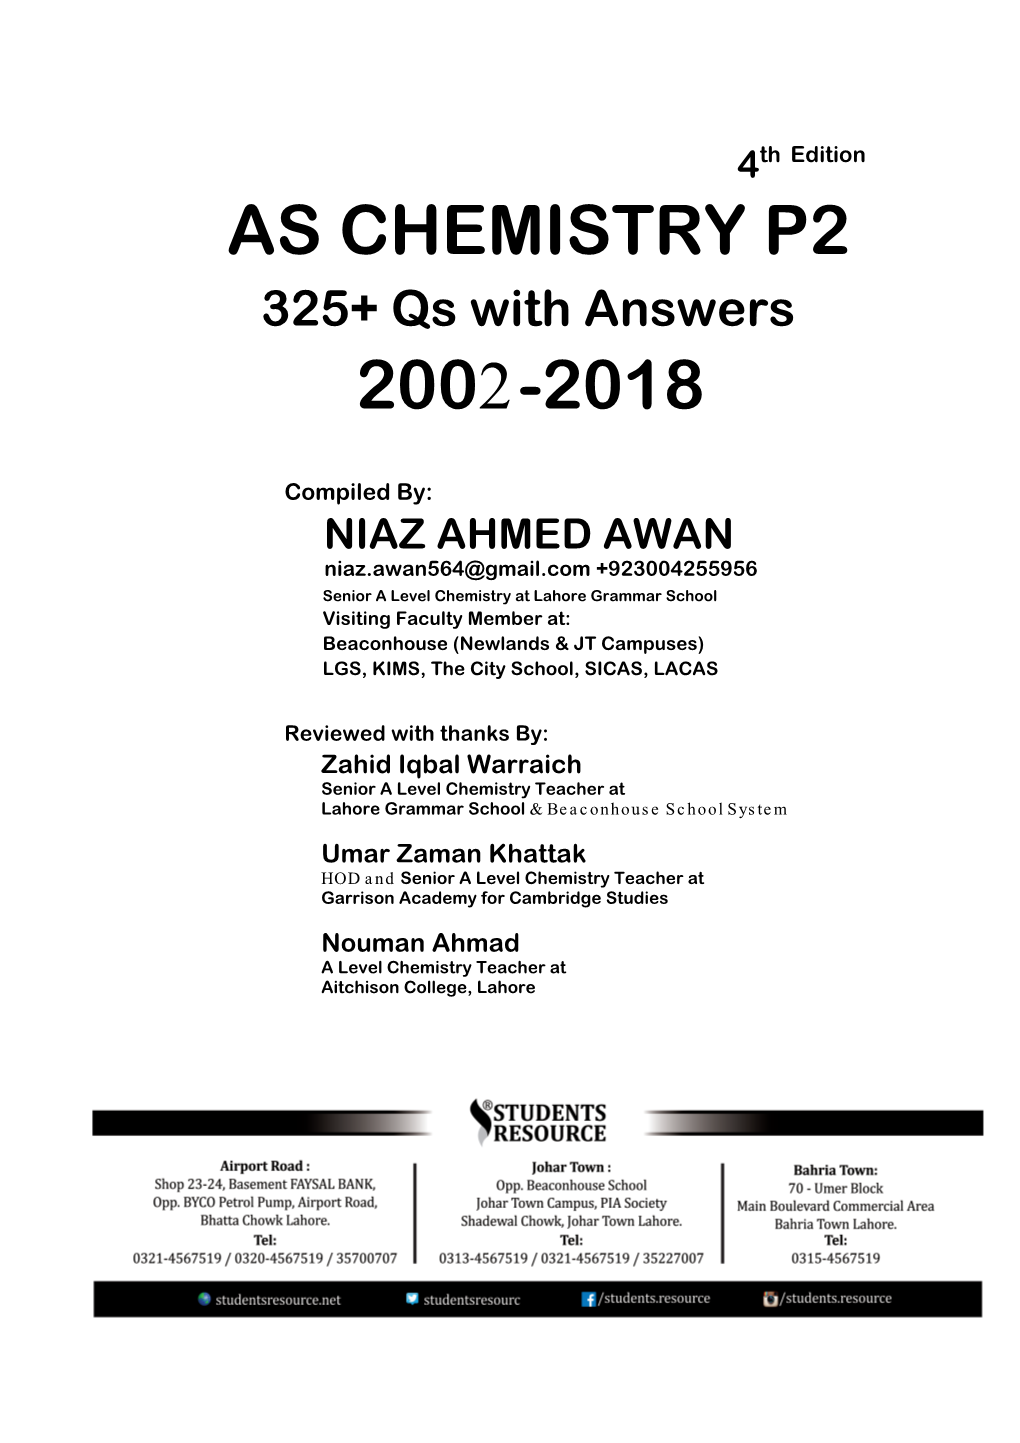 AS CHEMISTRY P2 325+ Qs with Answers 2002-2018